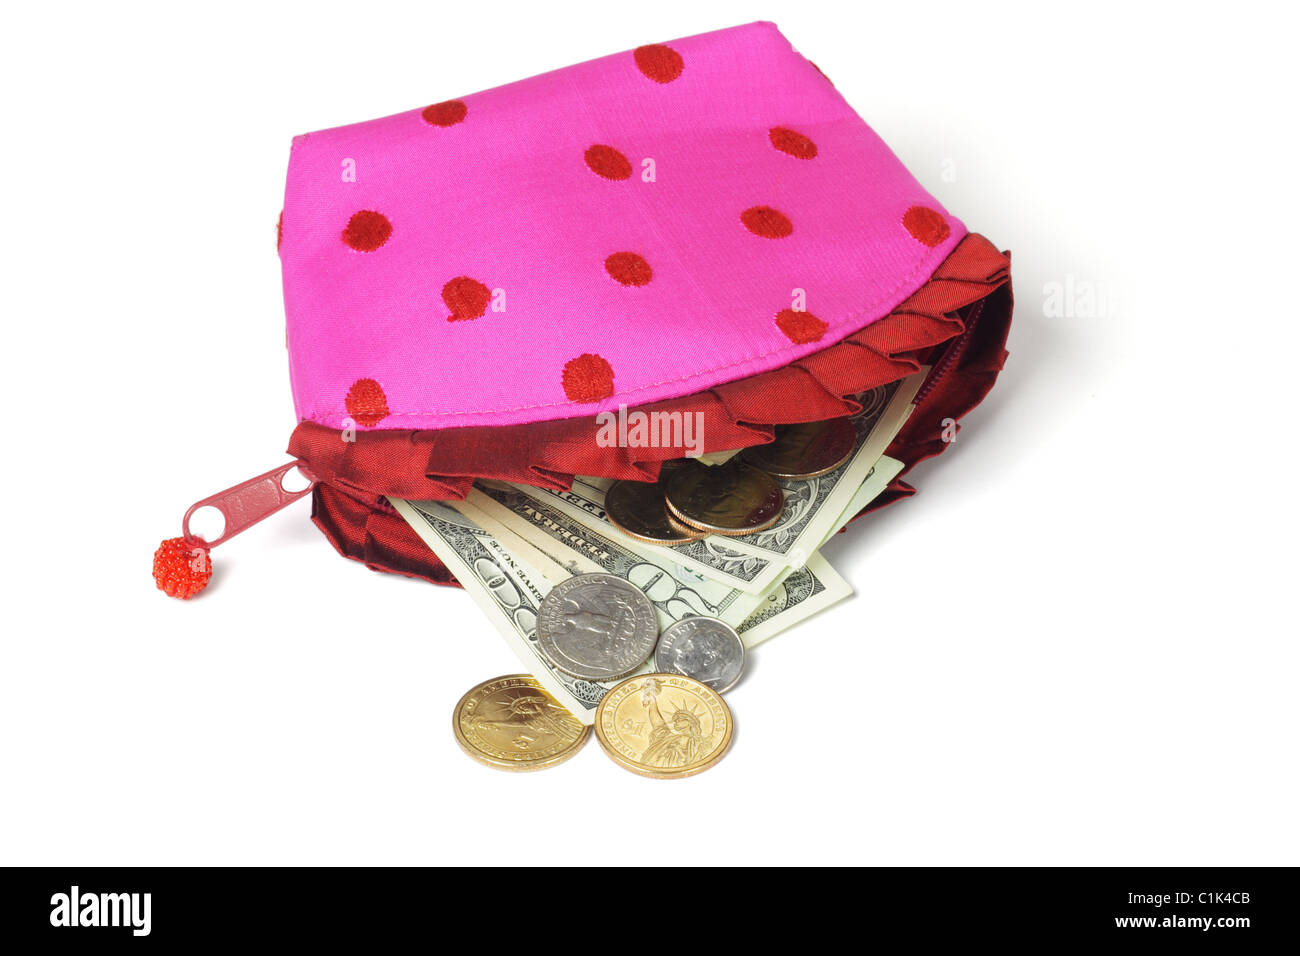 US notes and coins spilling out from pink purse on white background Stock Photo